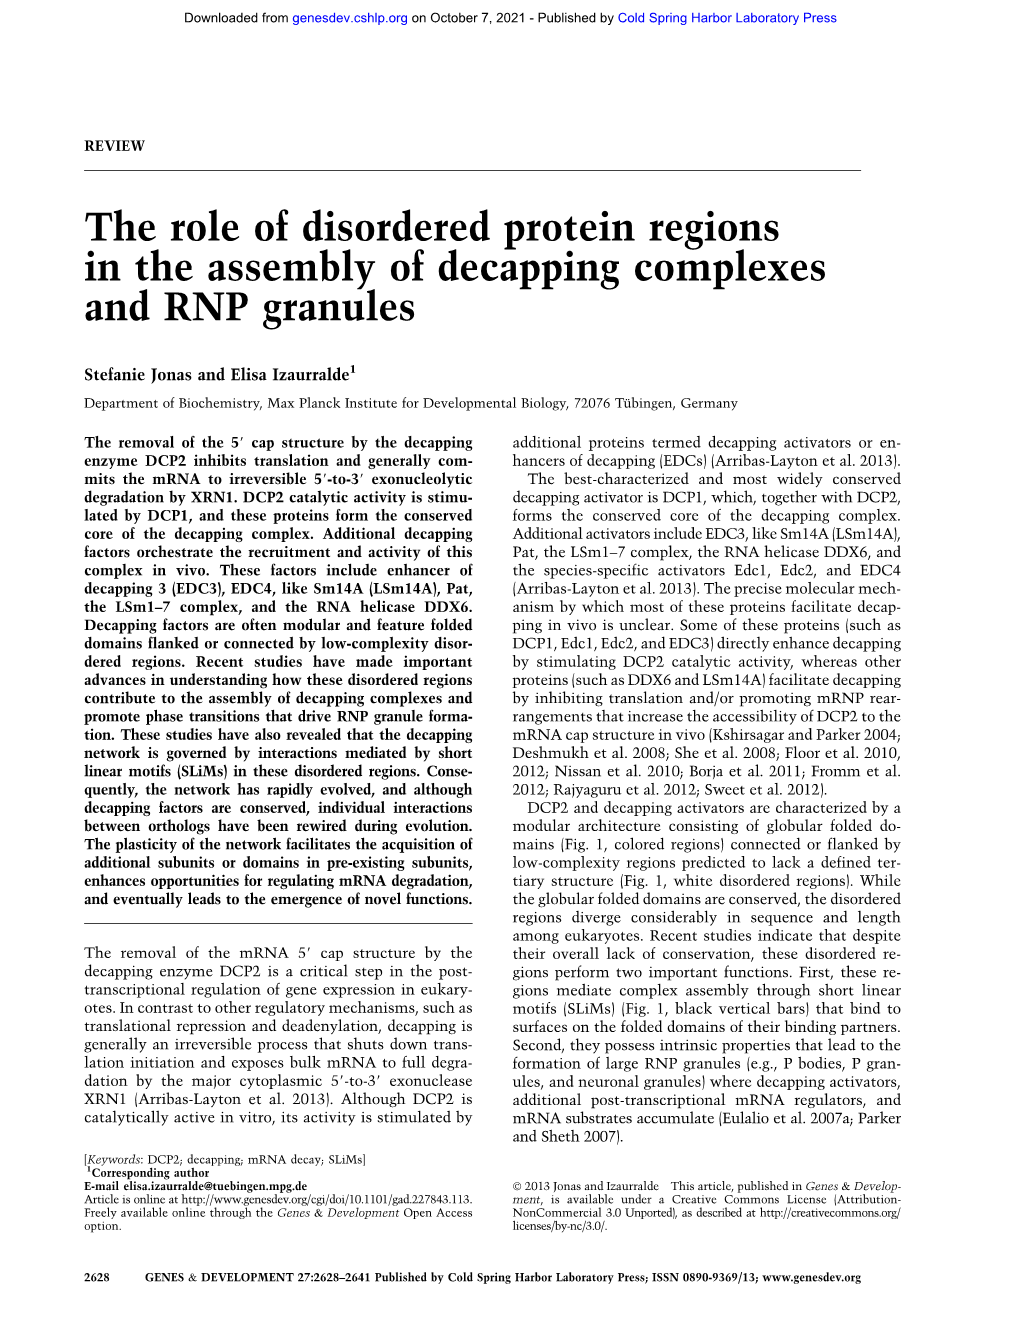 The Role of Disordered Protein Regions in the Assembly of Decapping Complexes and RNP Granules